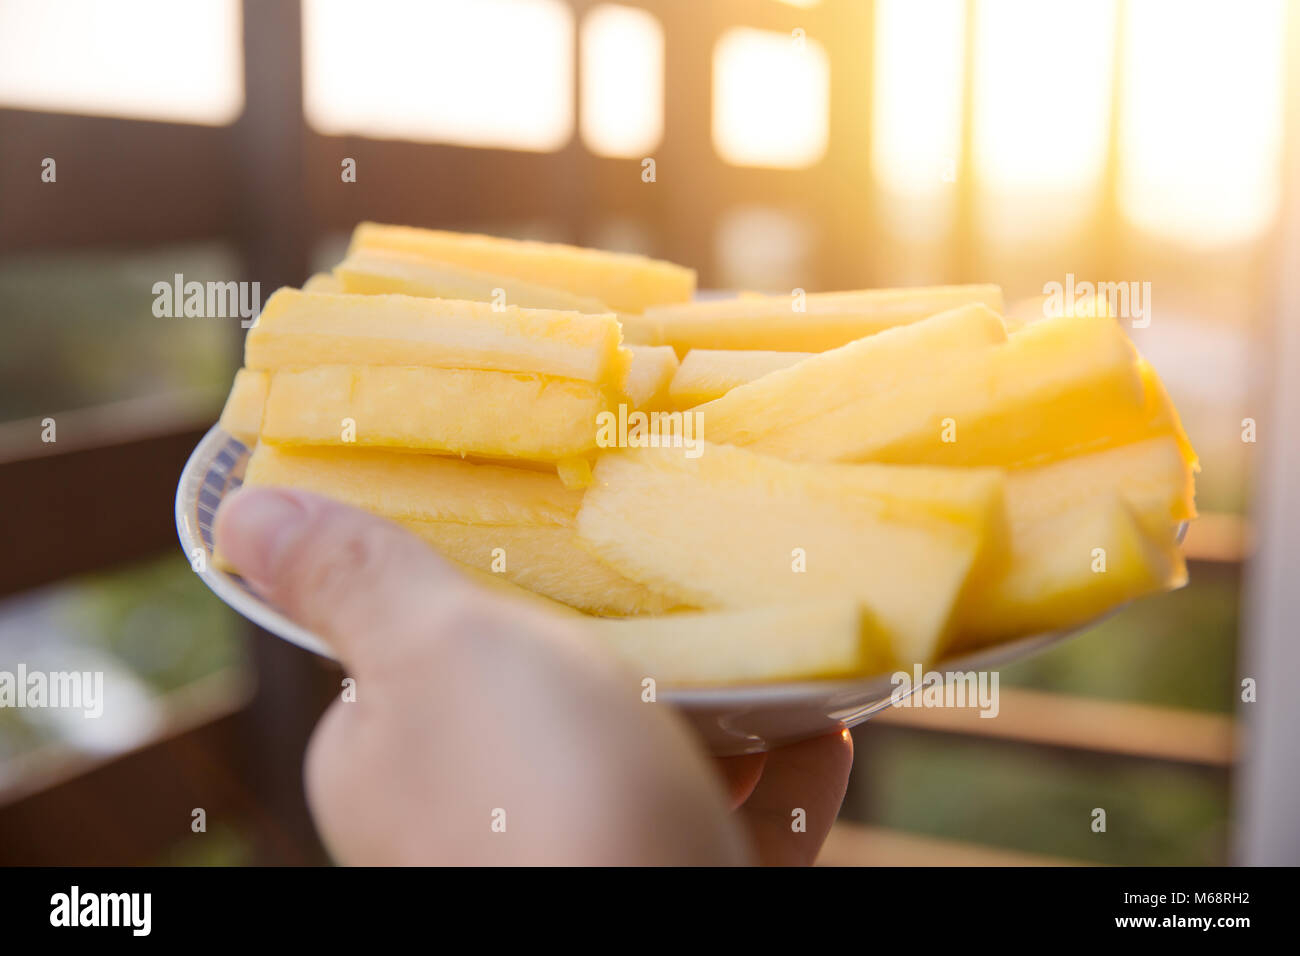 Pineapple Core Good food and High Bromelain Nutrition and Fiber for Diet Stock Photo